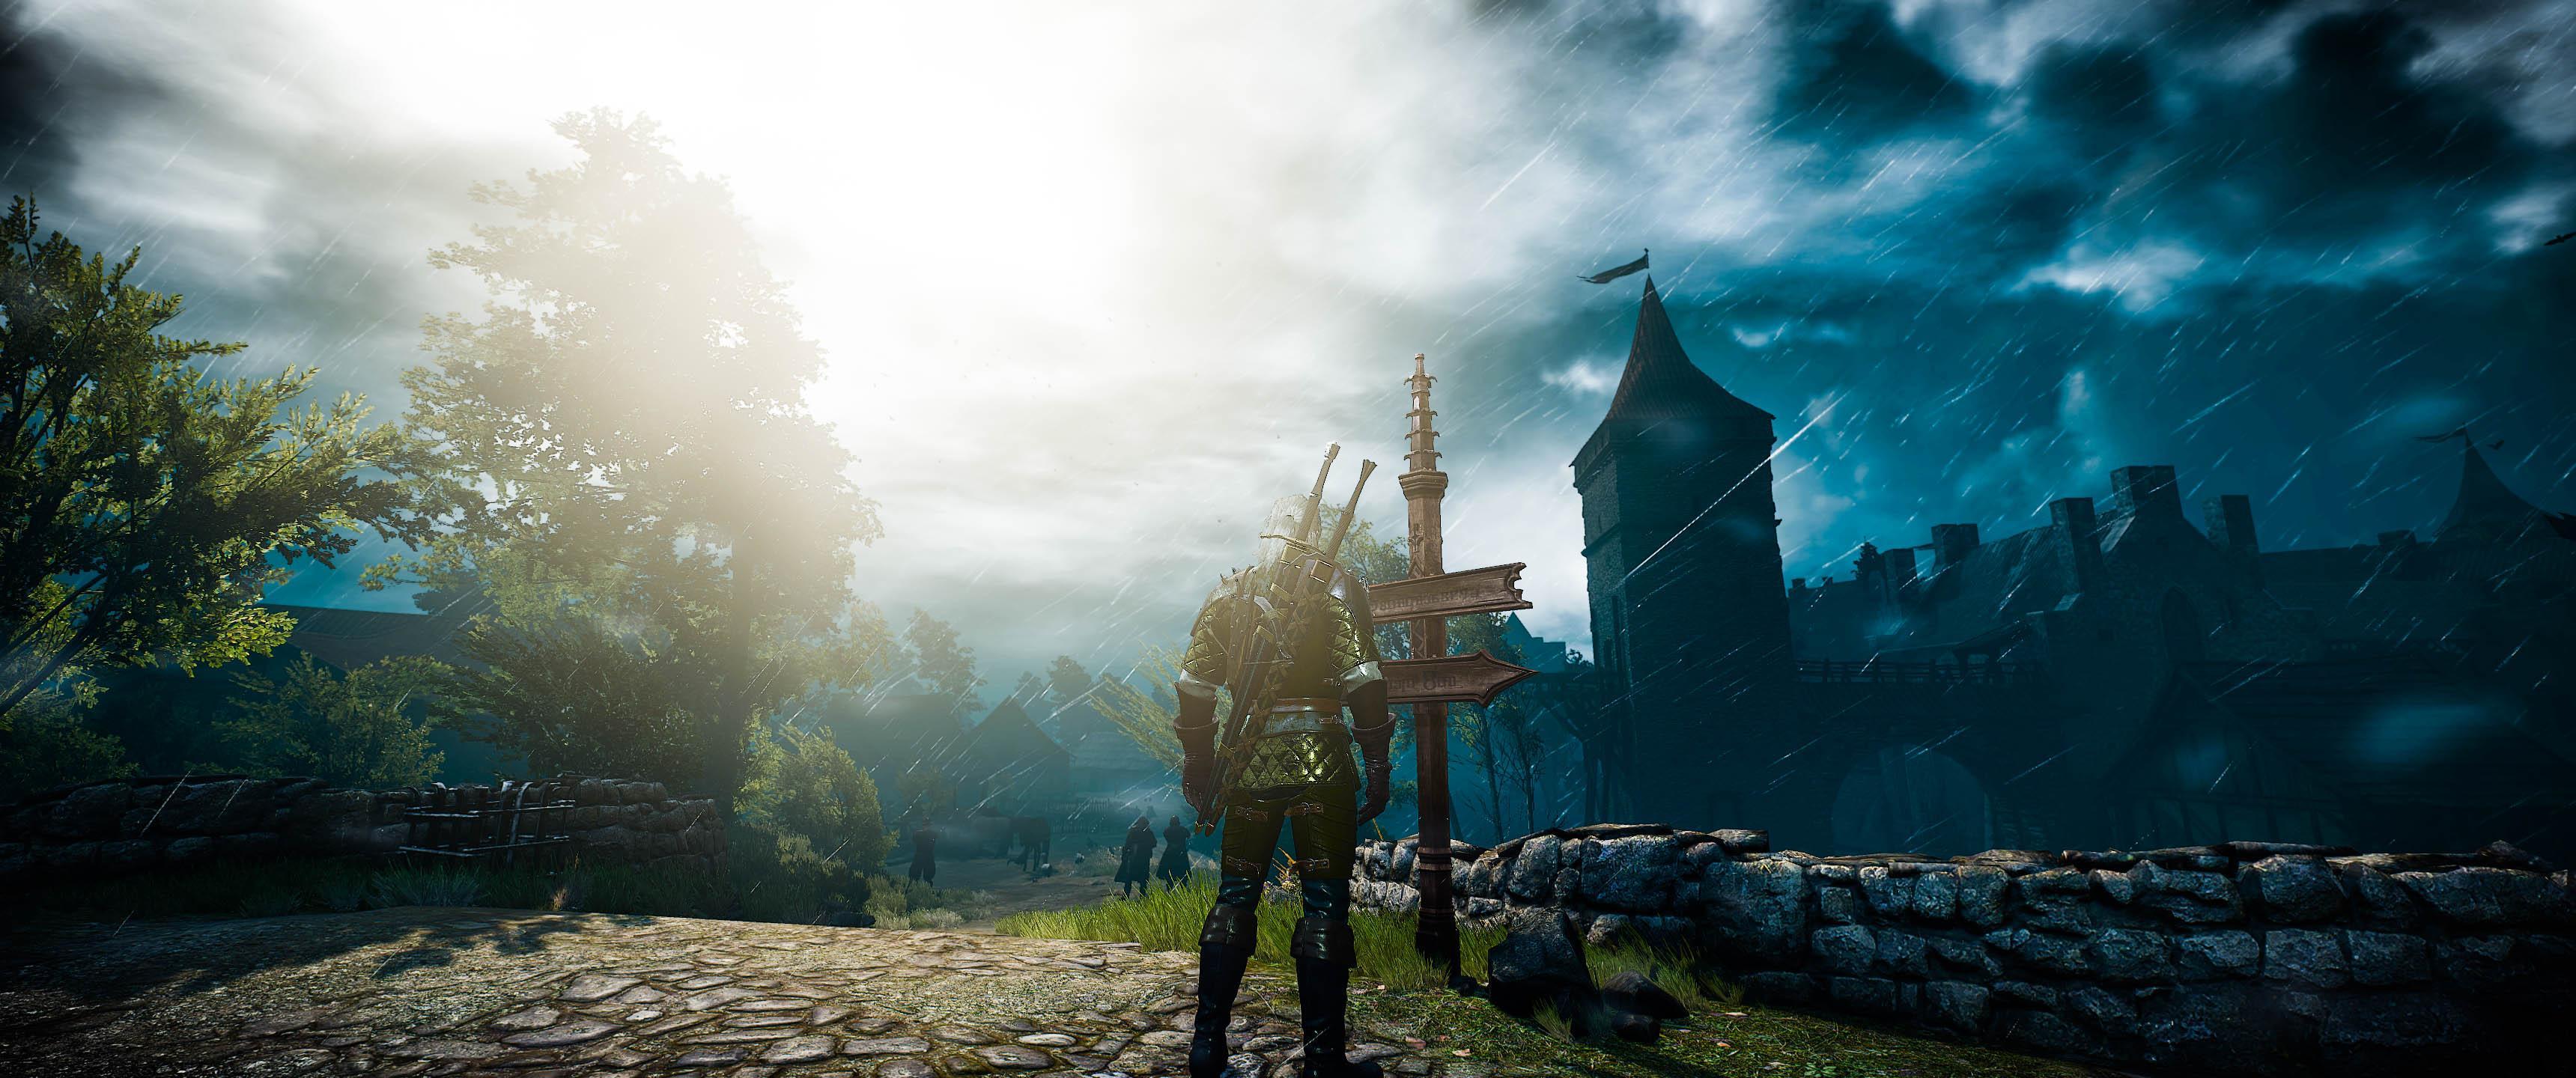 3440x1440p The Witcher 3 Wallpapers